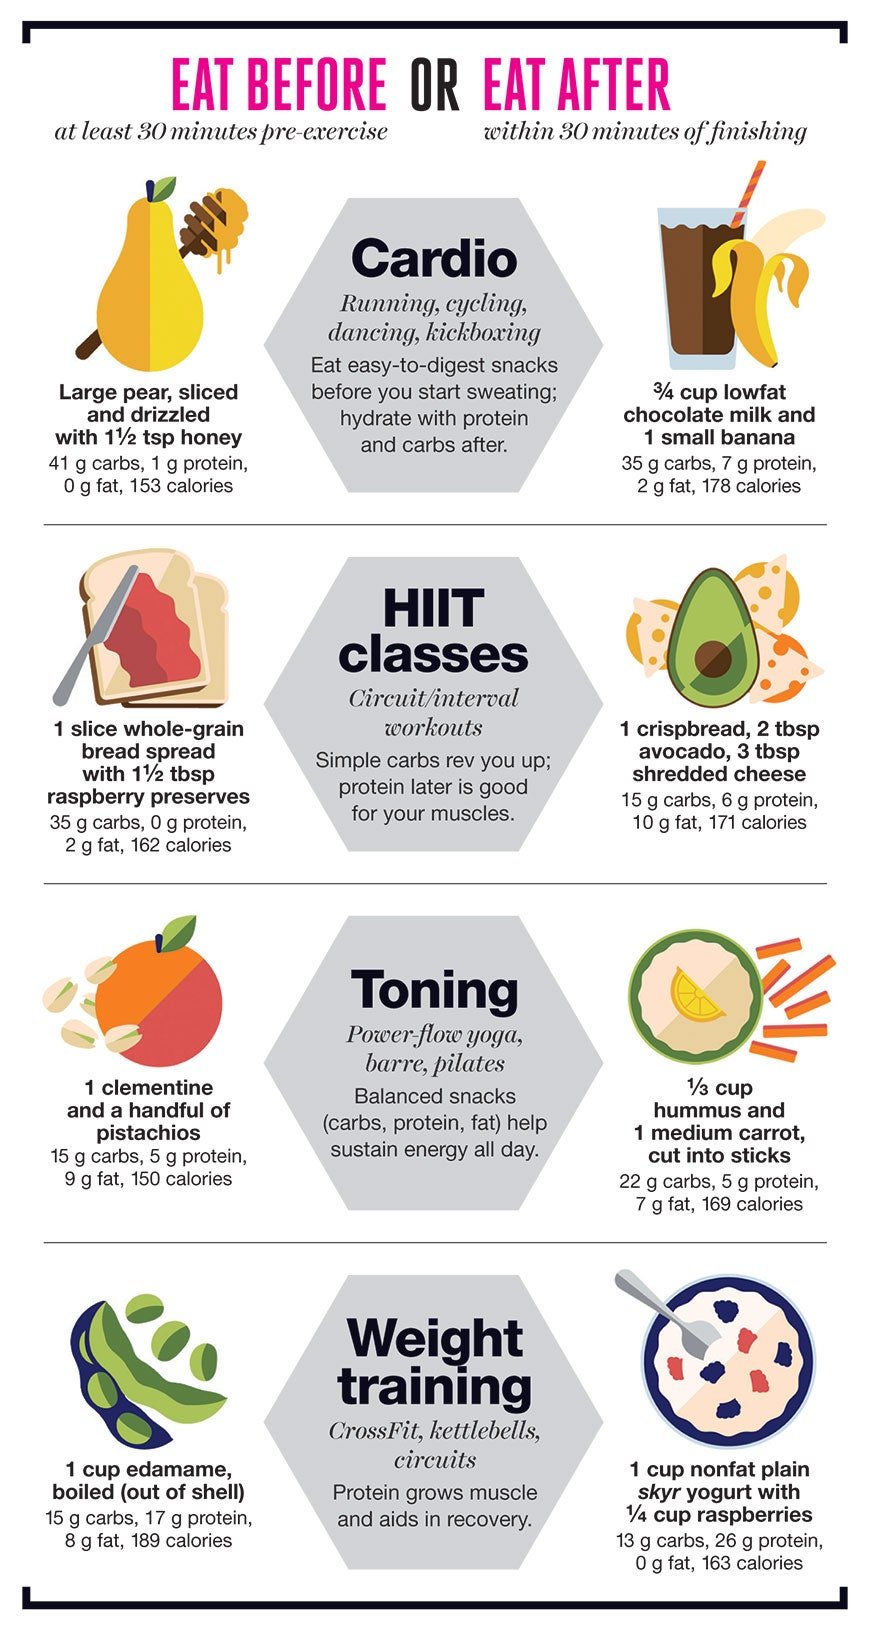 Healthy Foods for Cardio Workouts